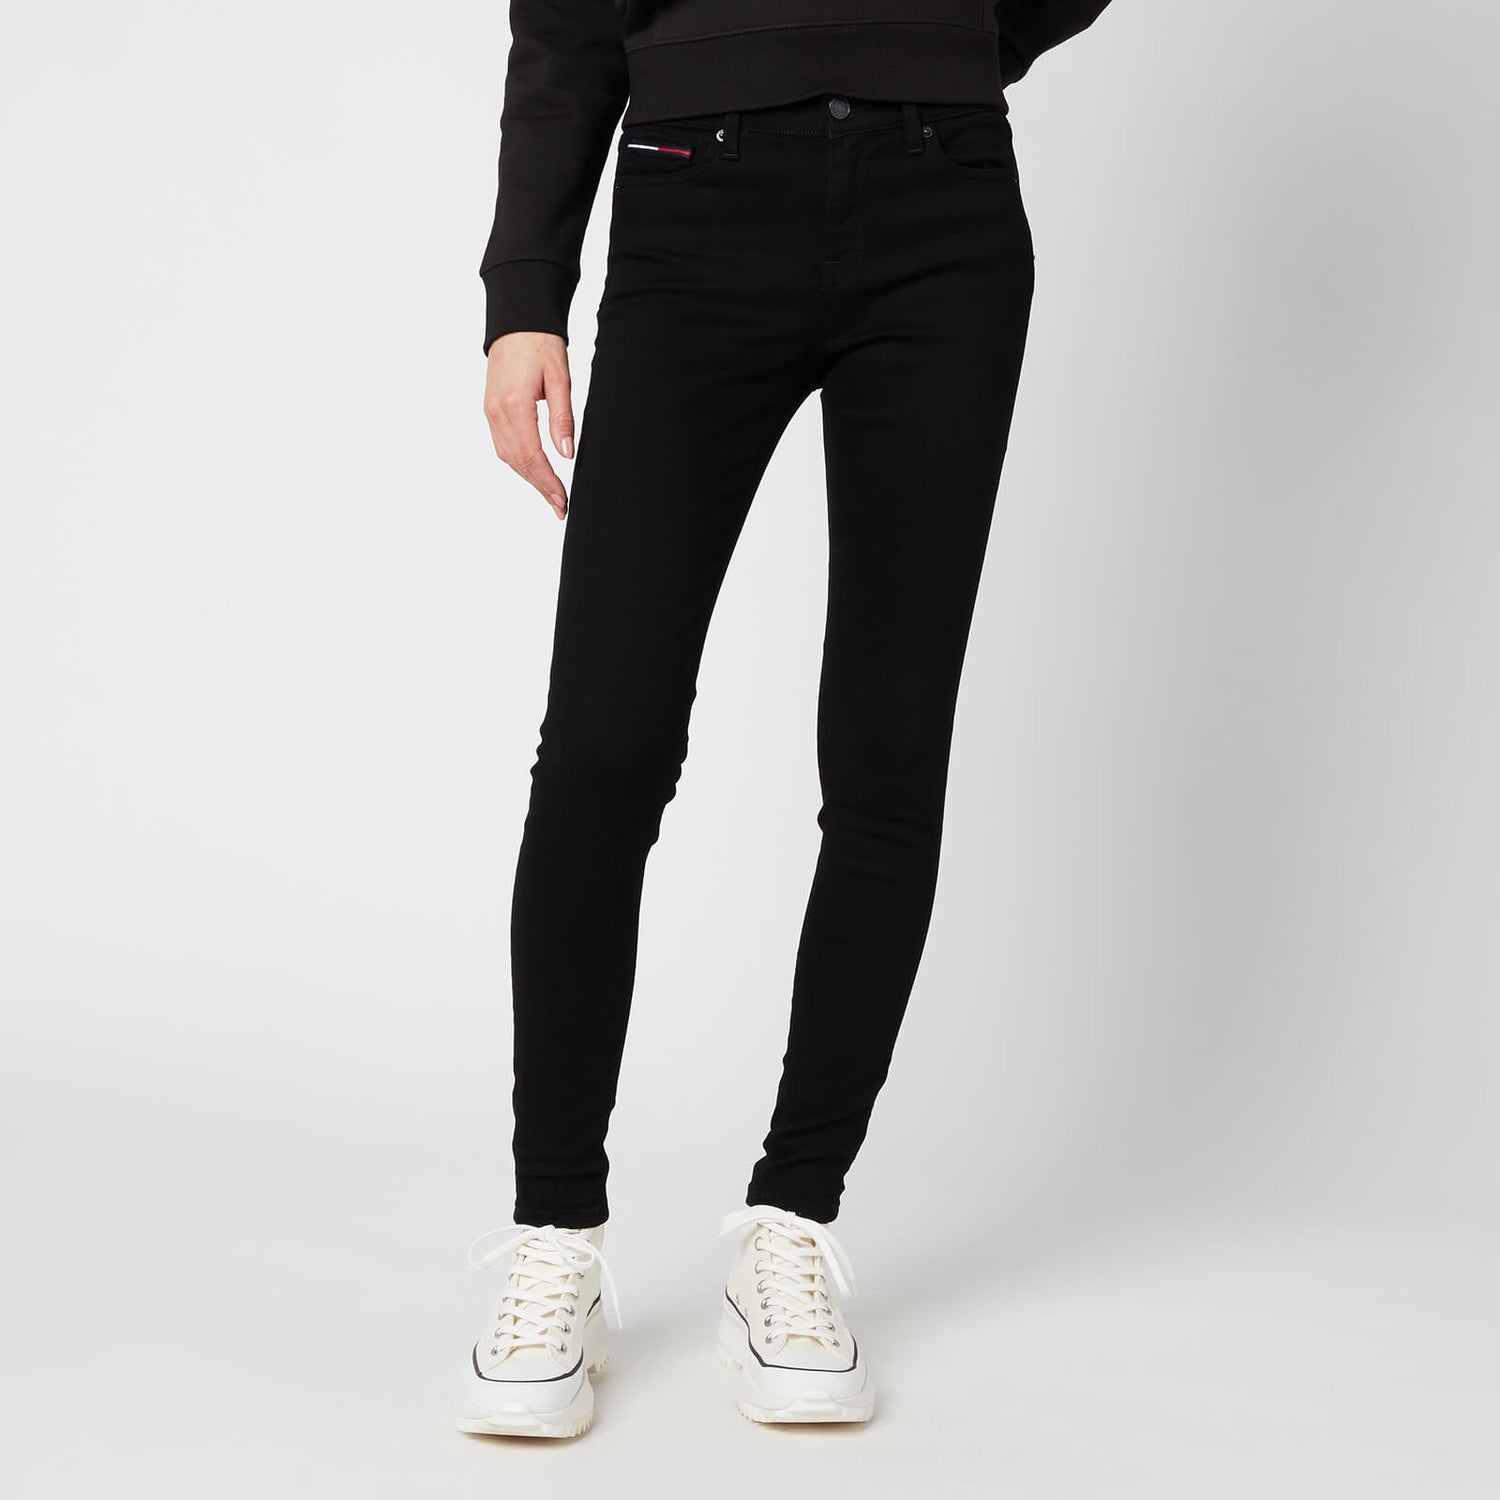 Tommy Jeans Women's Nora Mid-Rise Skinny Jeans - Black